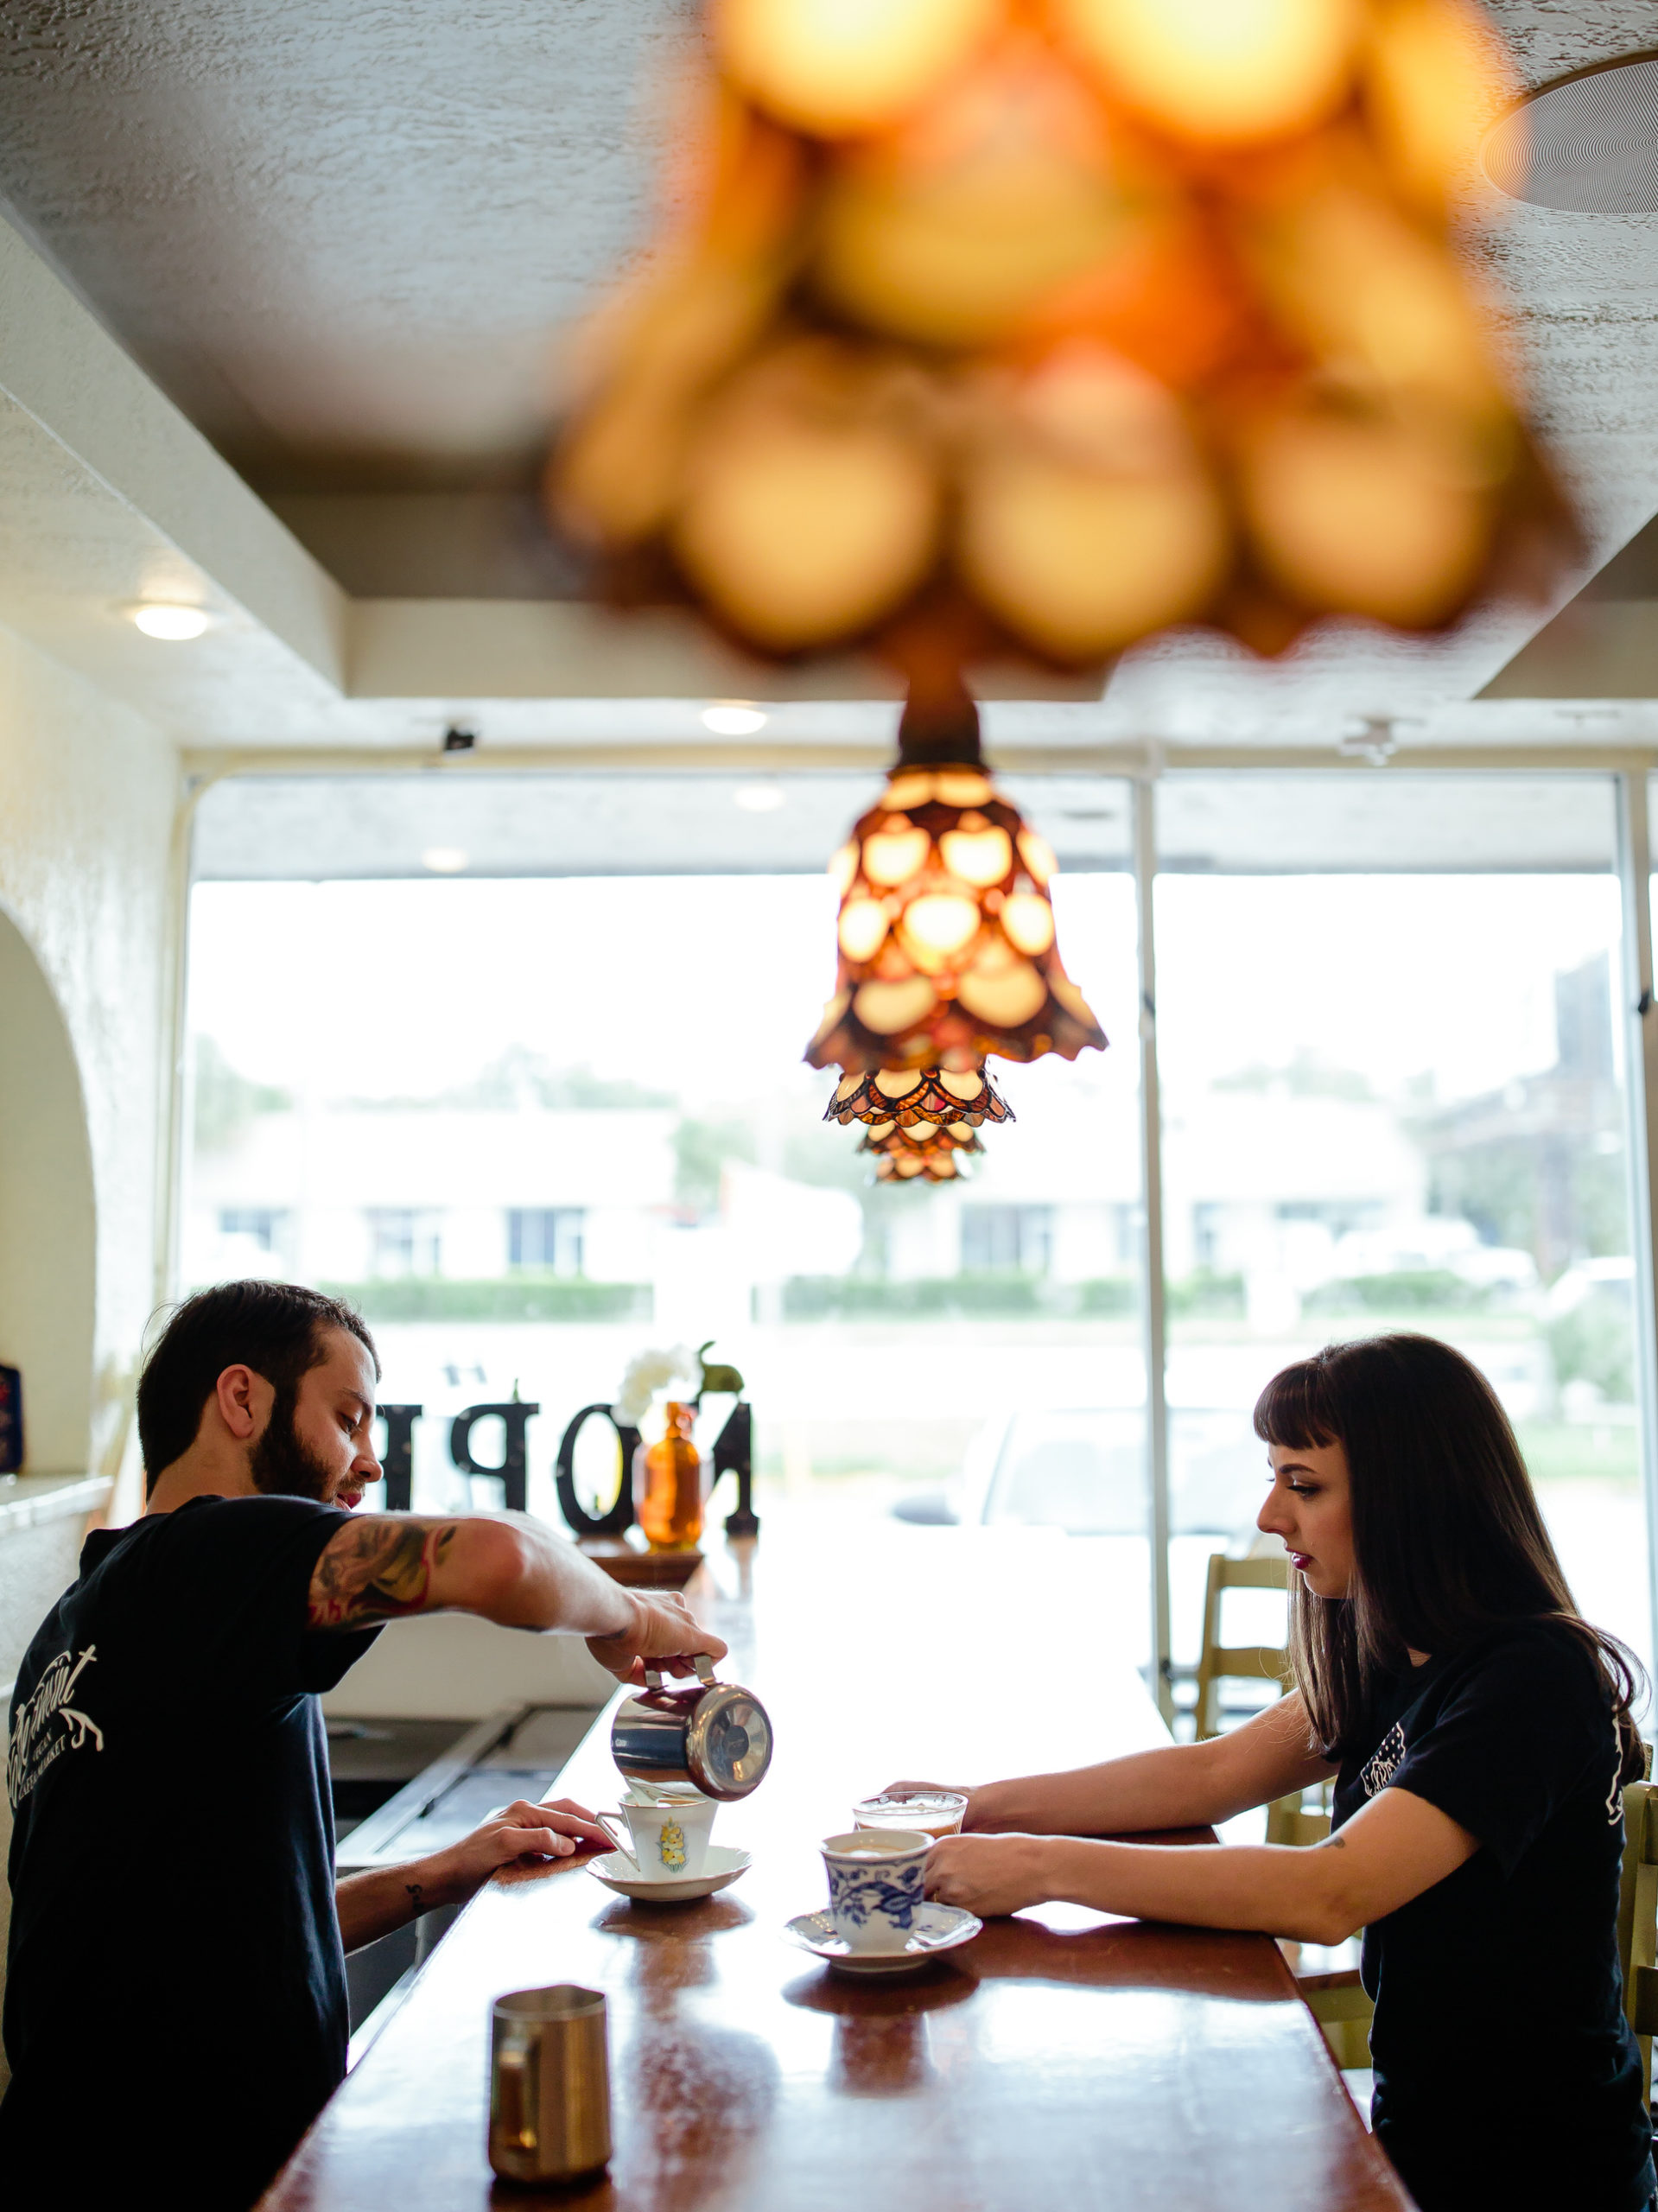 cafe-engagement-session-adorable-coffee-tea-lovers-tiny-house-photo-weddings.jpg